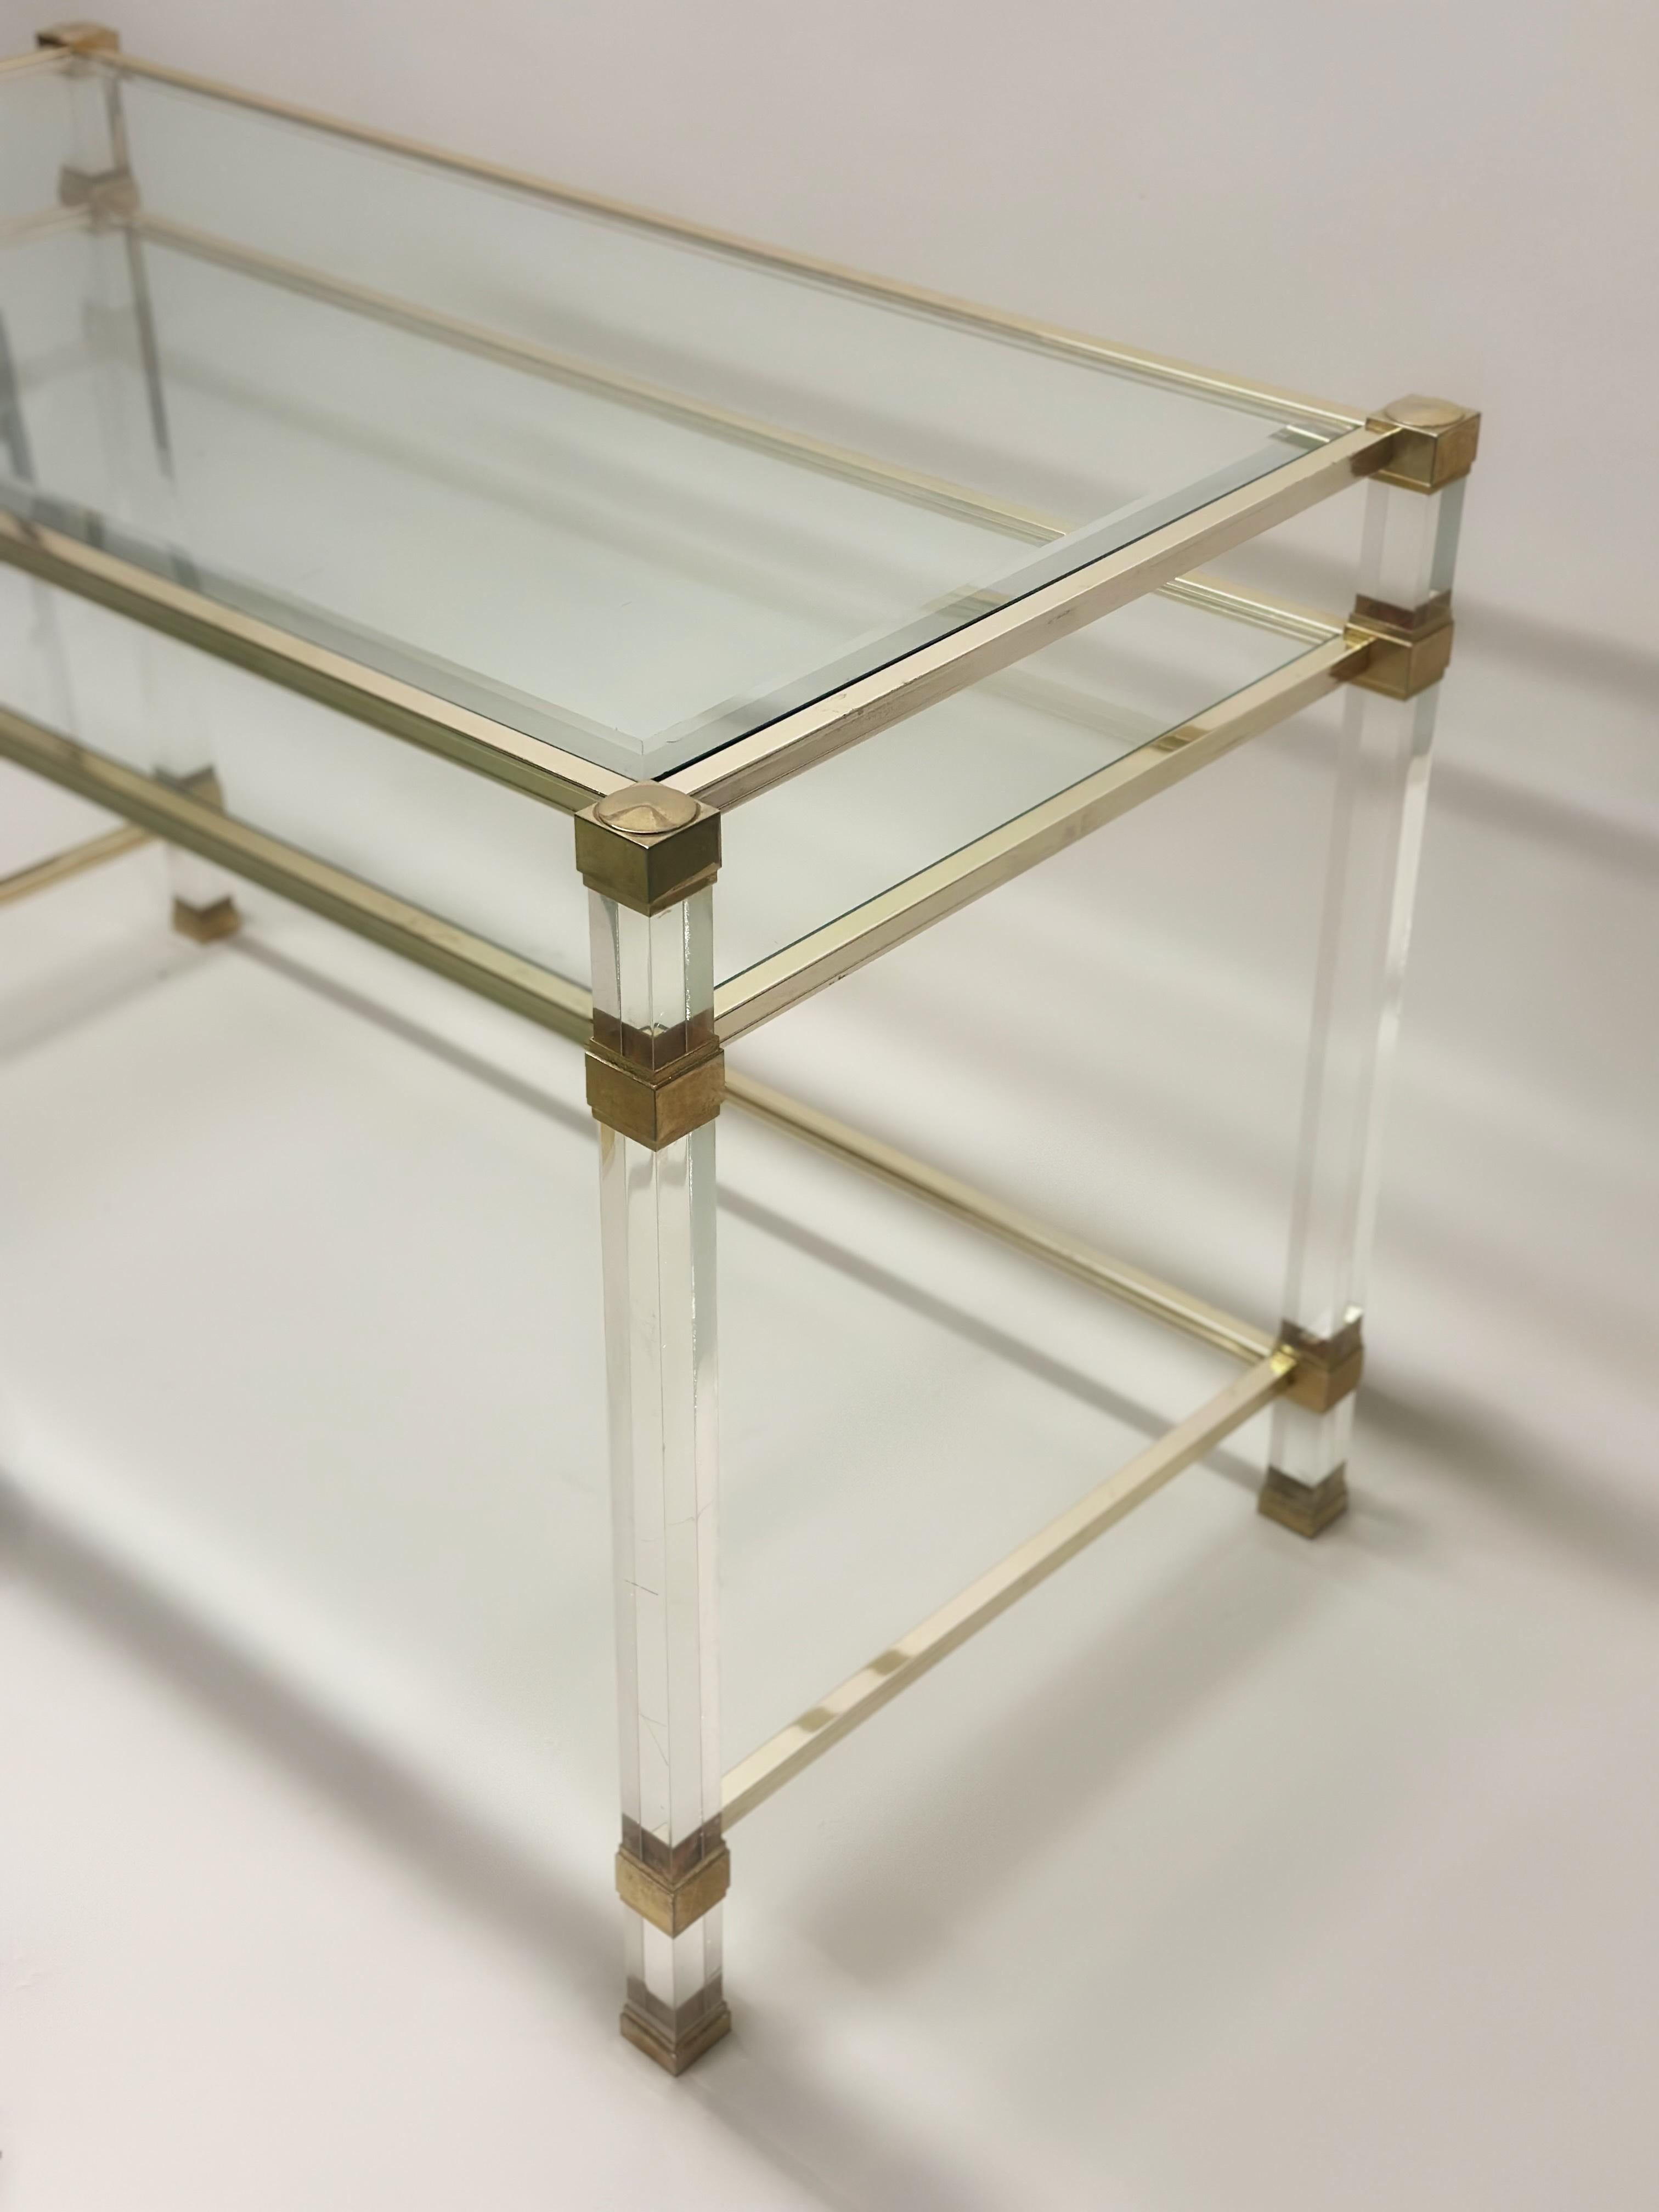 Elegant French Mid-Century Modern lucite and glass desk /writing table / vanity by Pierre Vandel. This piece expresses the essence of modernism. It's transparent, minimal and functional. The elegant frame is in nickeled brass and the transparent